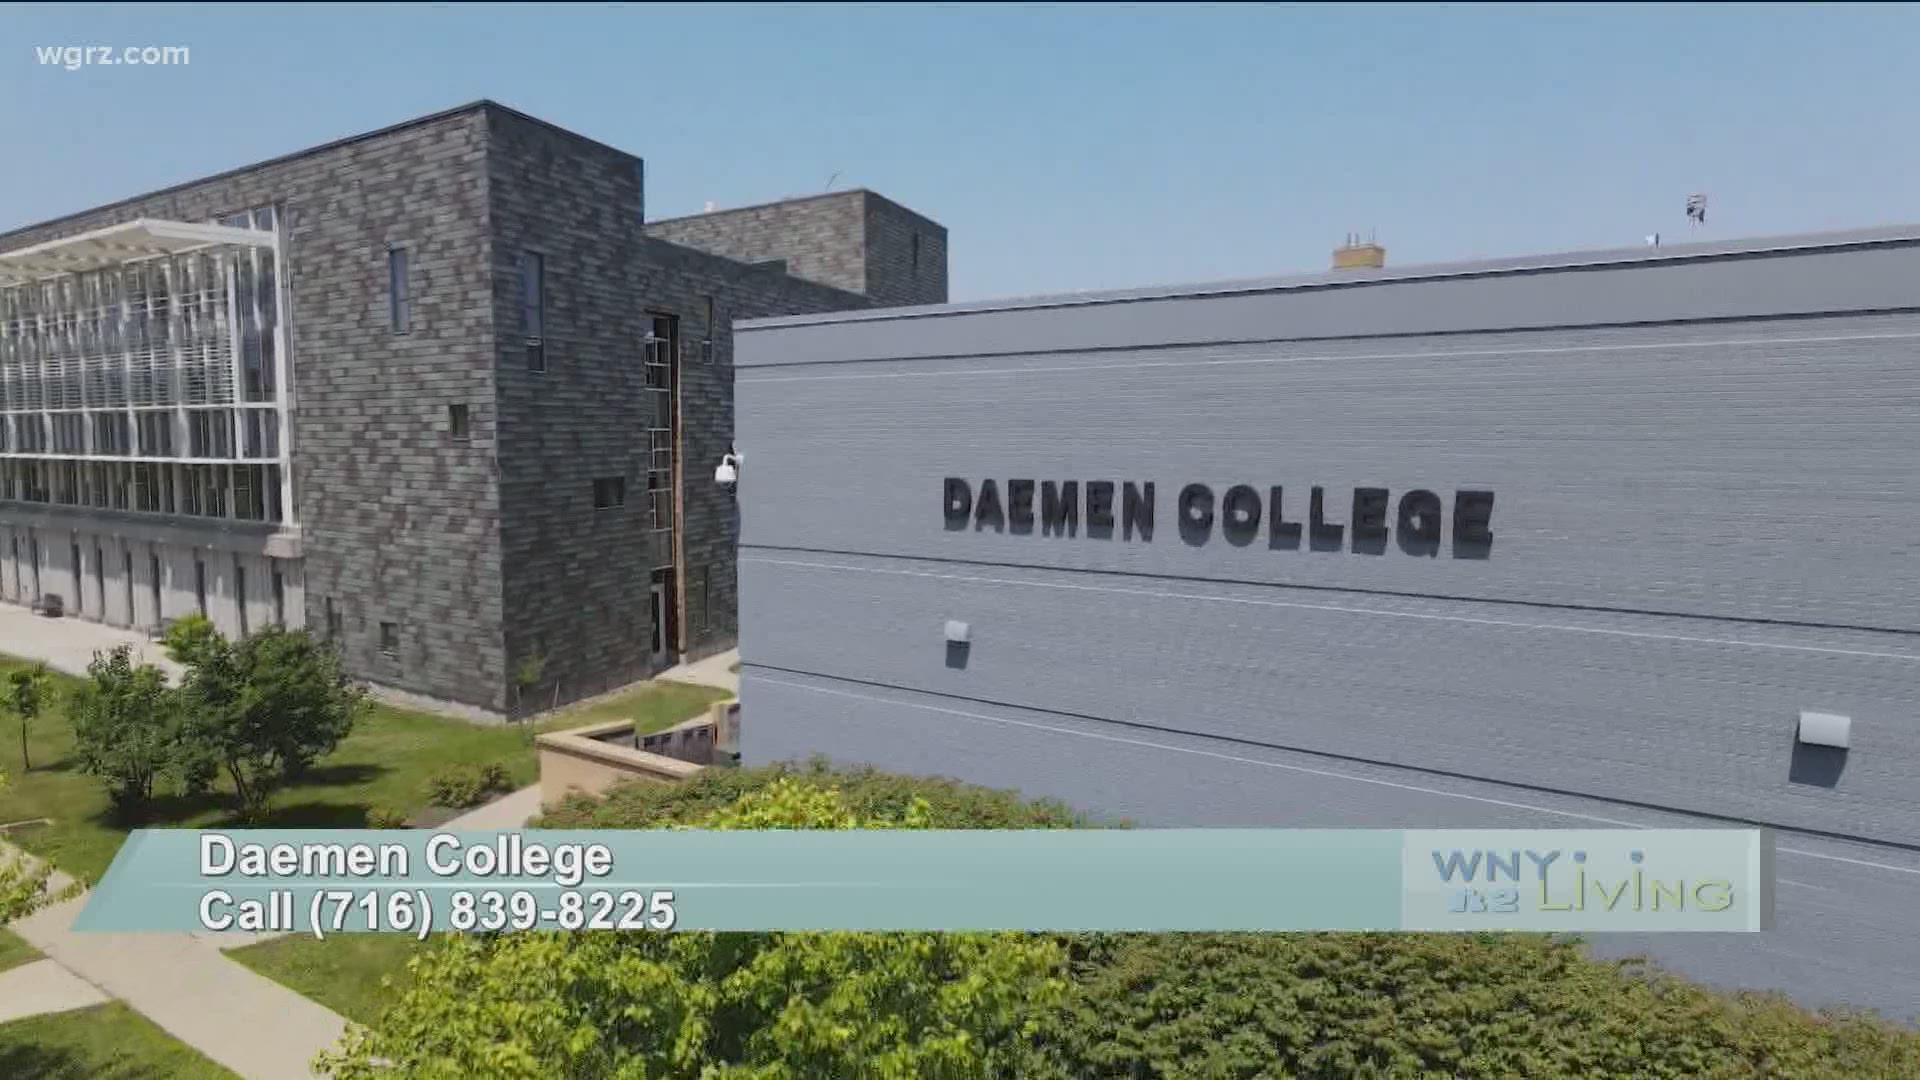 WNY Living - August 29  - Daemen College (THIS VIDEO IS SPONSORED BY DAEMEN COLLEGE)